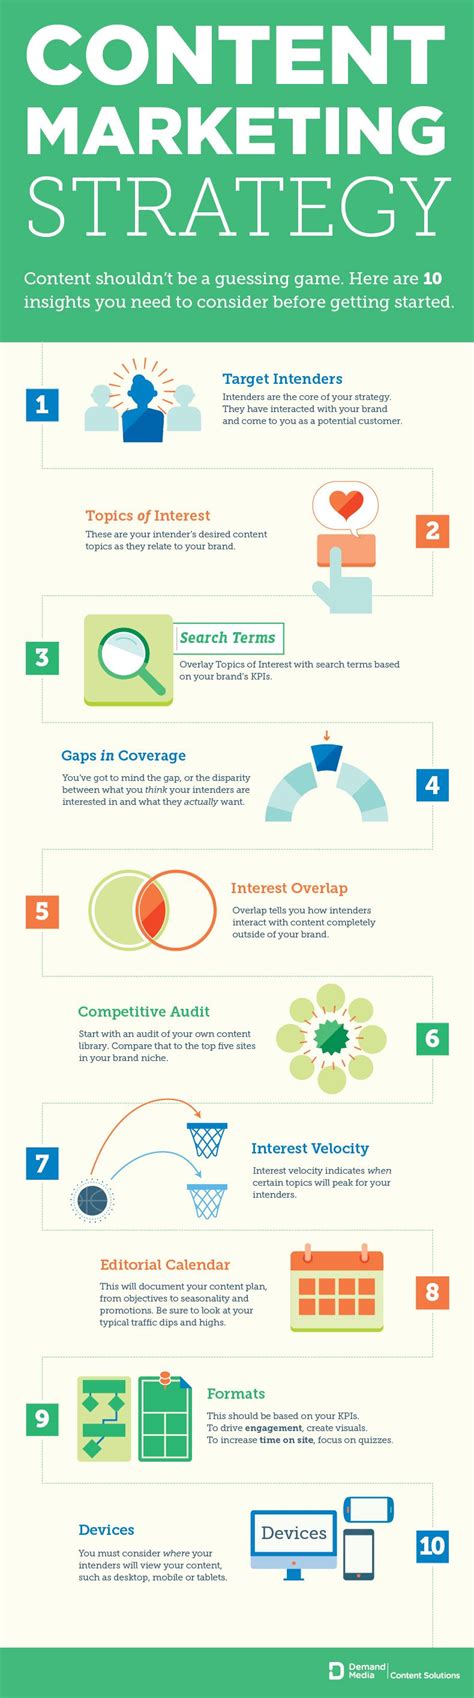 content marketing strategy infographic visualistan